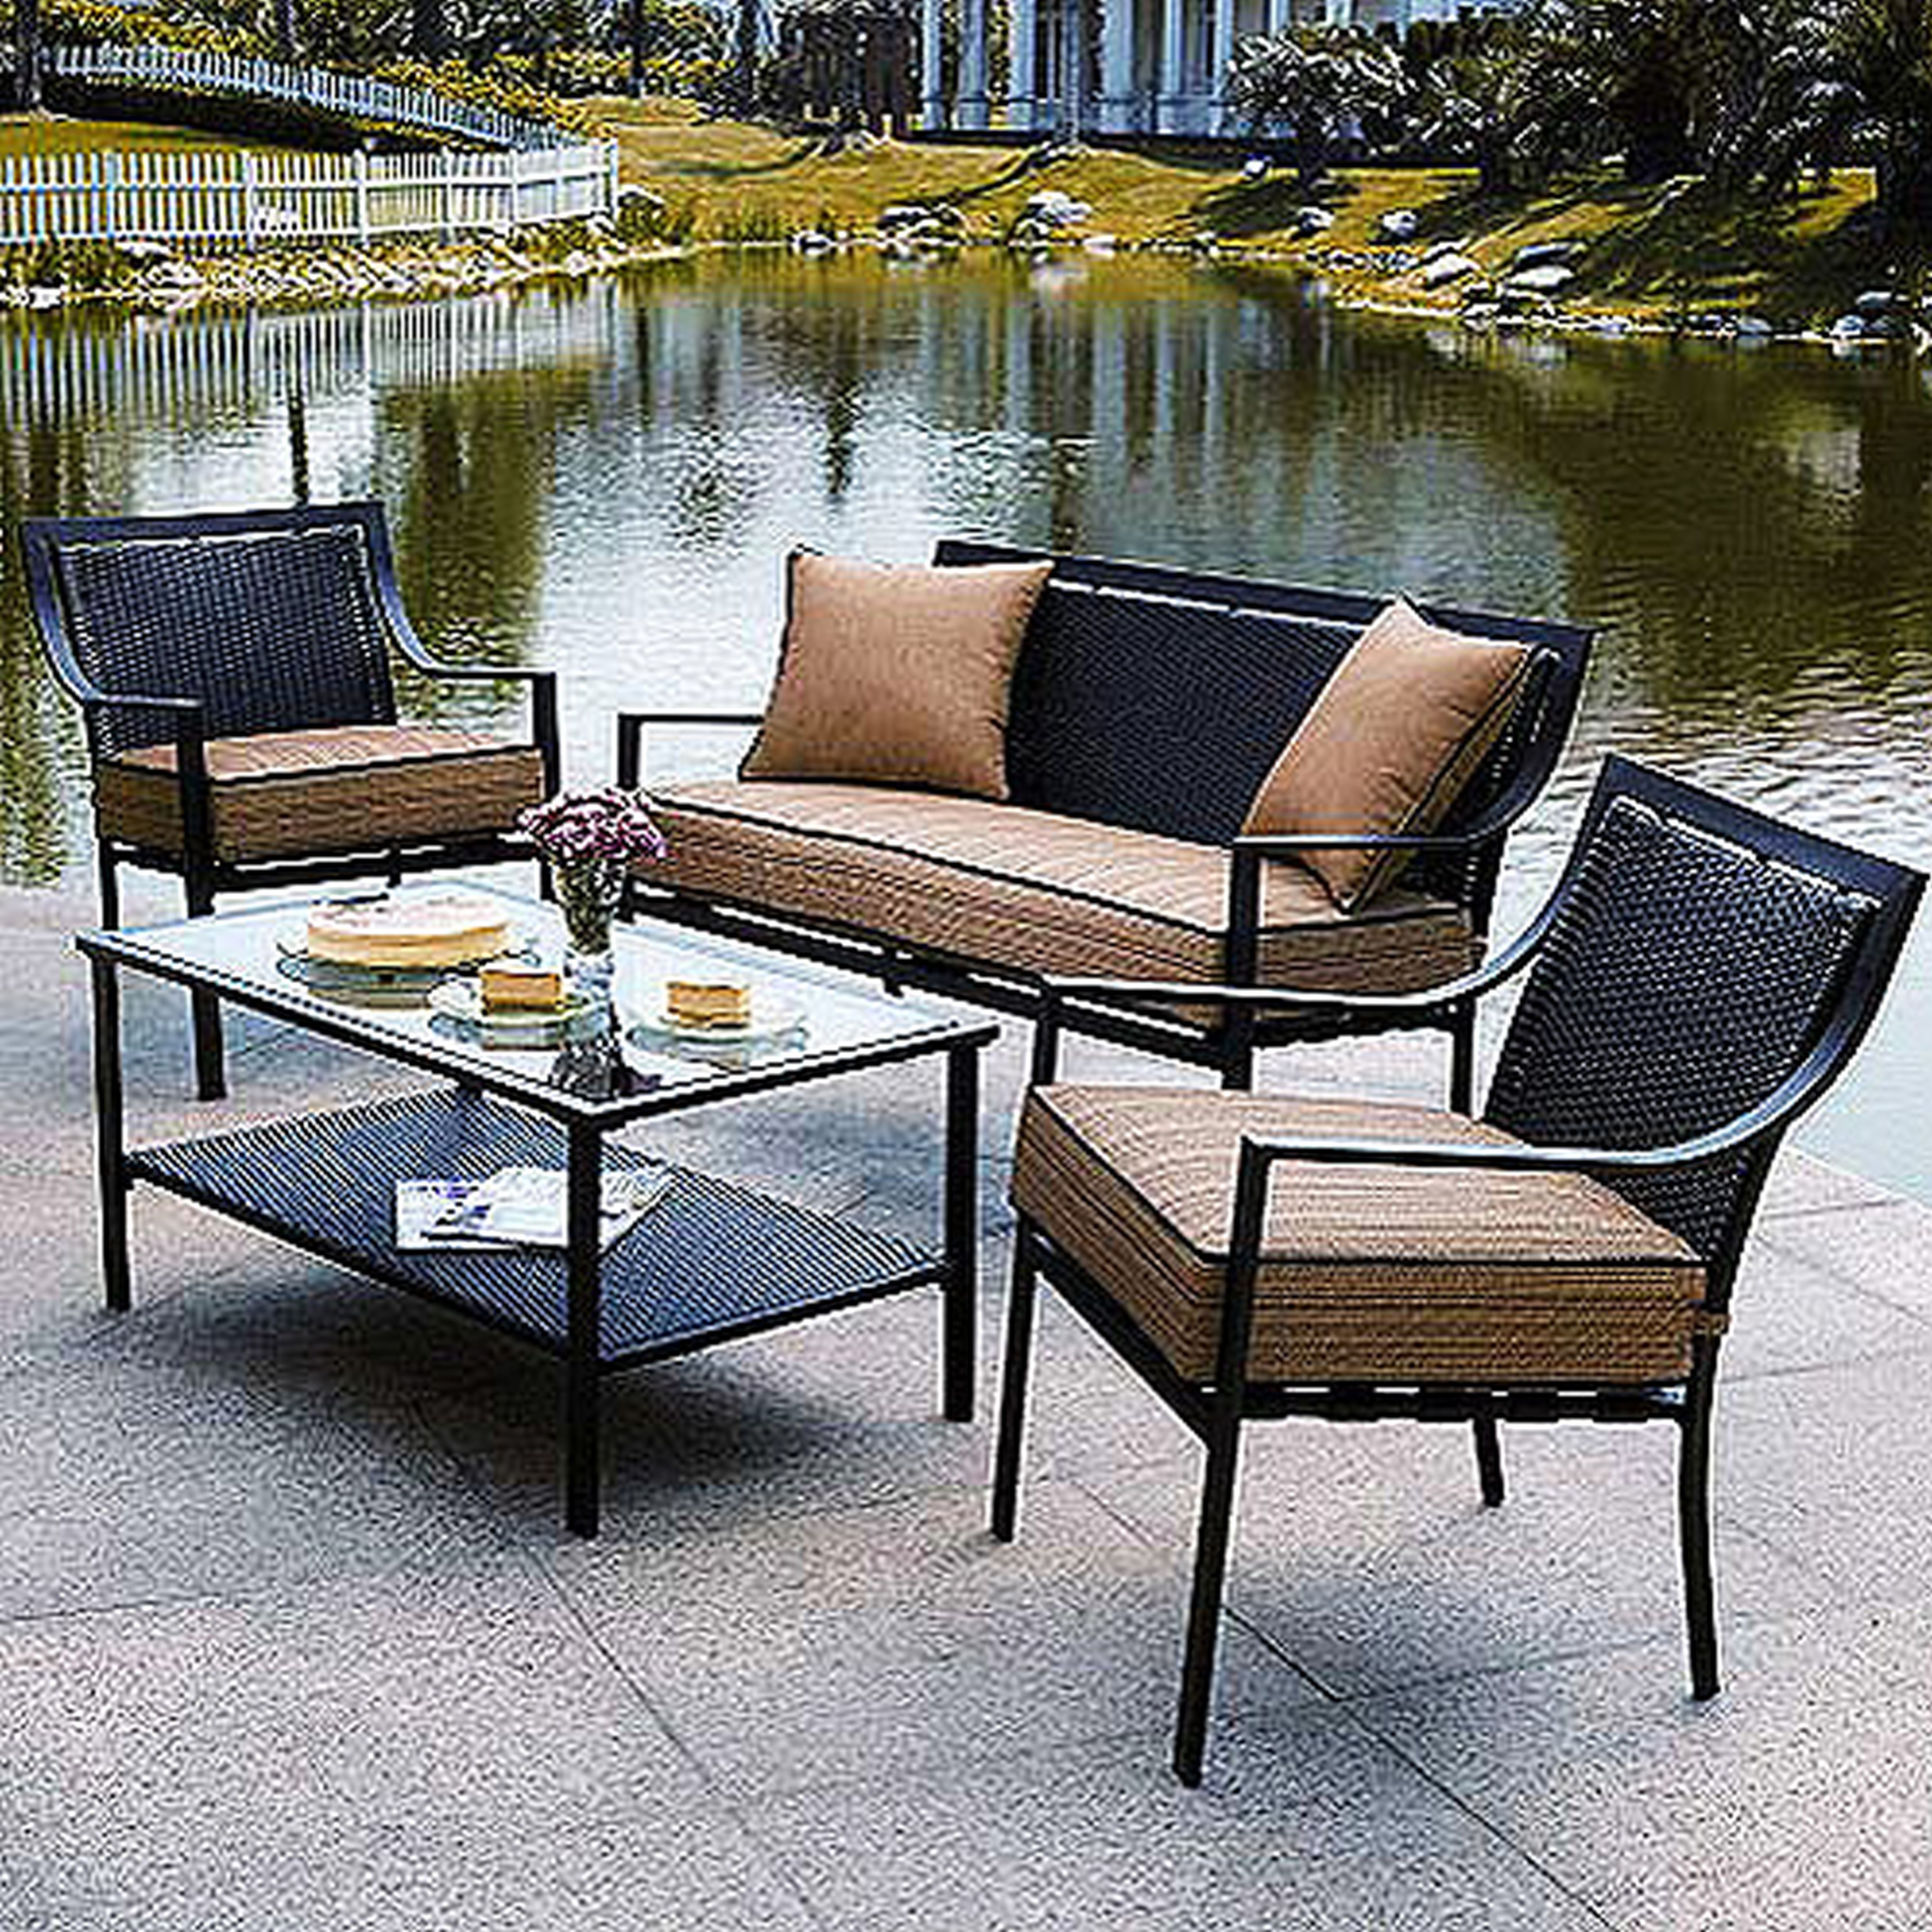 likable modern outdoor patio tables bistro large chairs chair only table set canadian rectangular depot dining home cushions clearance side furniture tire sets full size high end